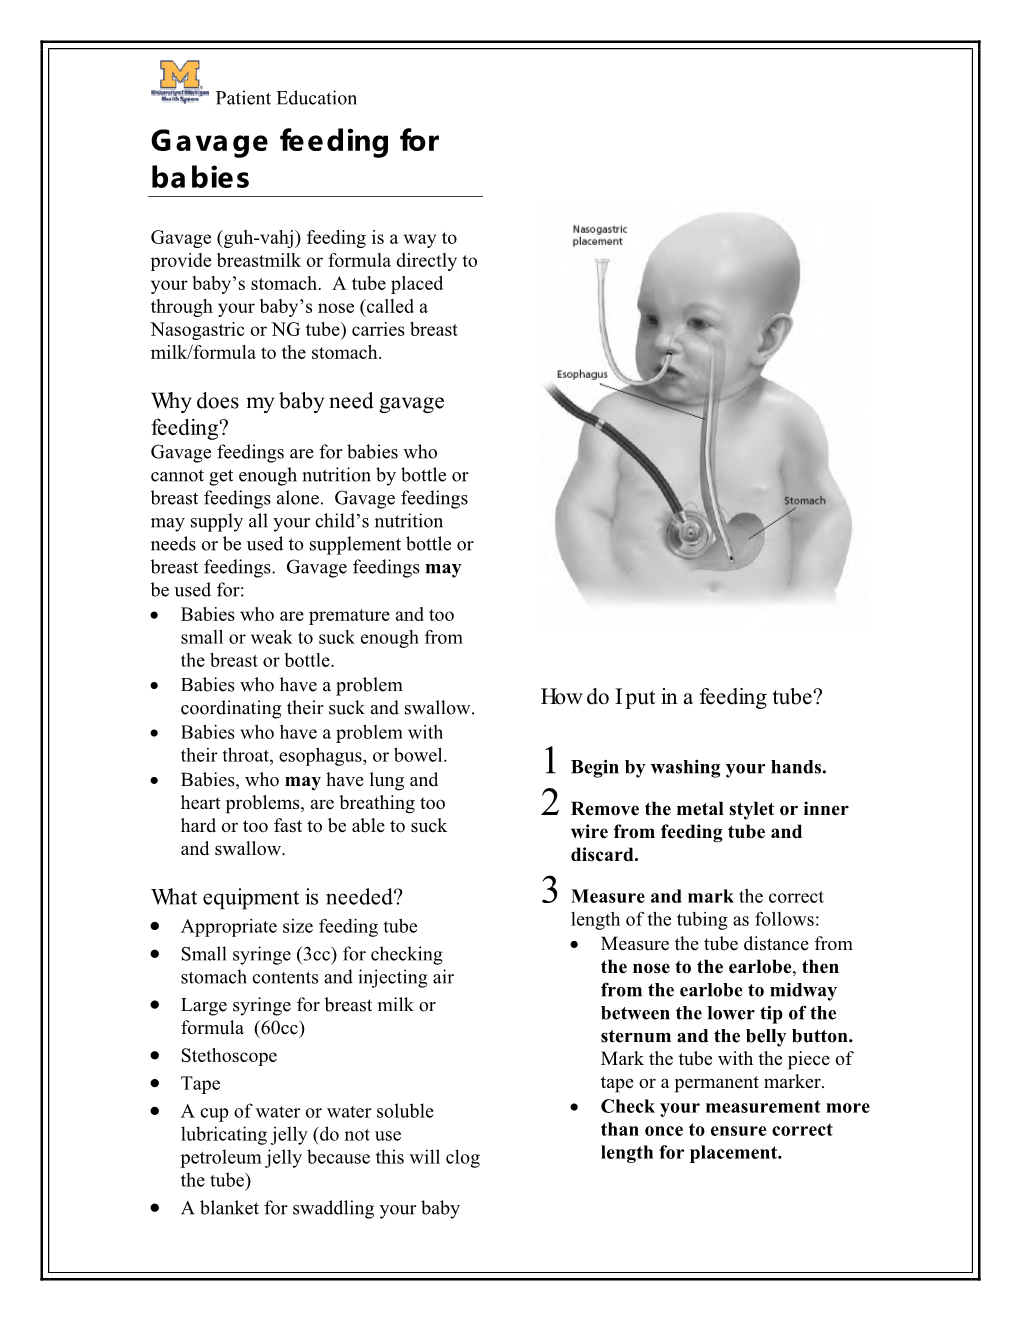 Gavage Feeding for Babies Is for Educational Purposes Only